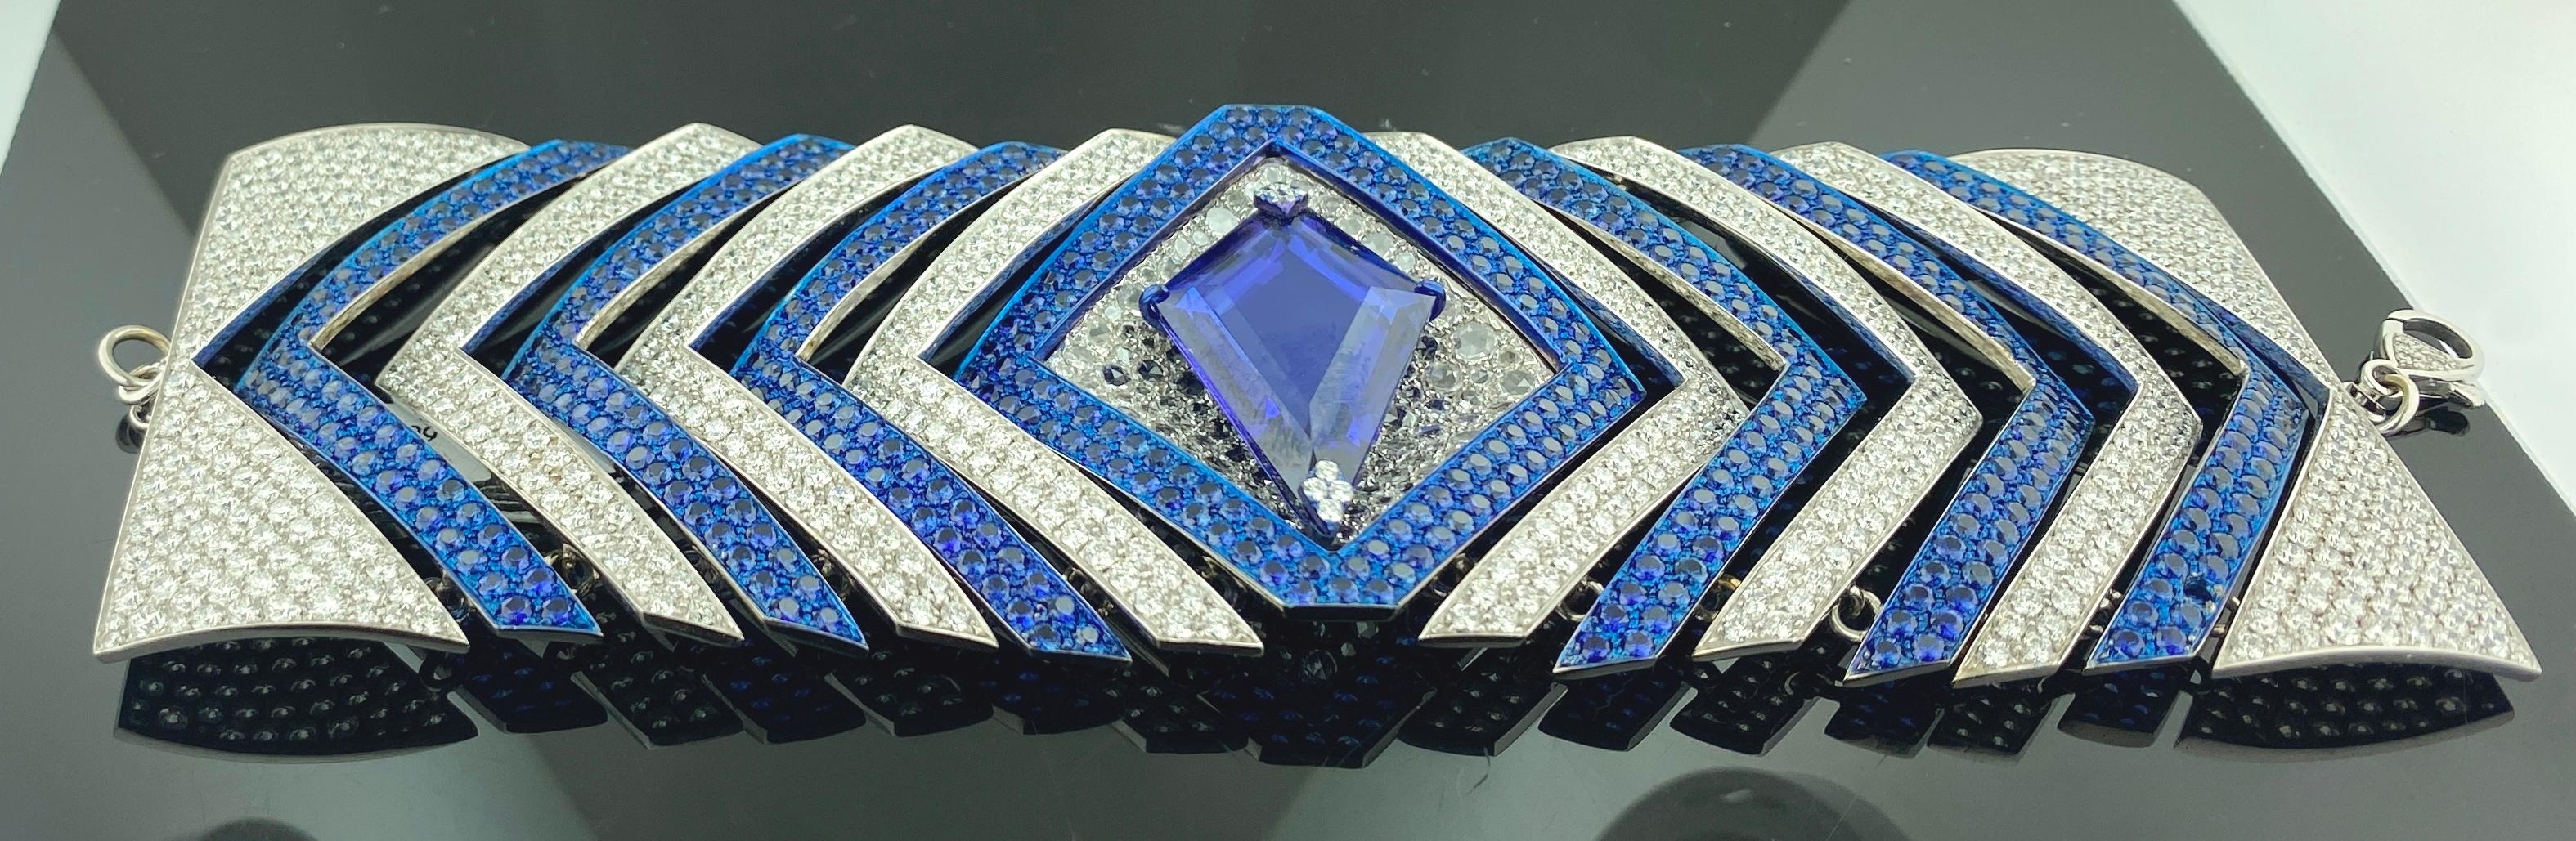 Set in 18 karat white gold and Titanium is a 17.74 carat Tanzanite center stone plus another 17.28 carats of round cut blue sapphires and 23.50 carats of round brilliant cut diamonds. 45.69 grams of gold and 5 grams of Titanium.